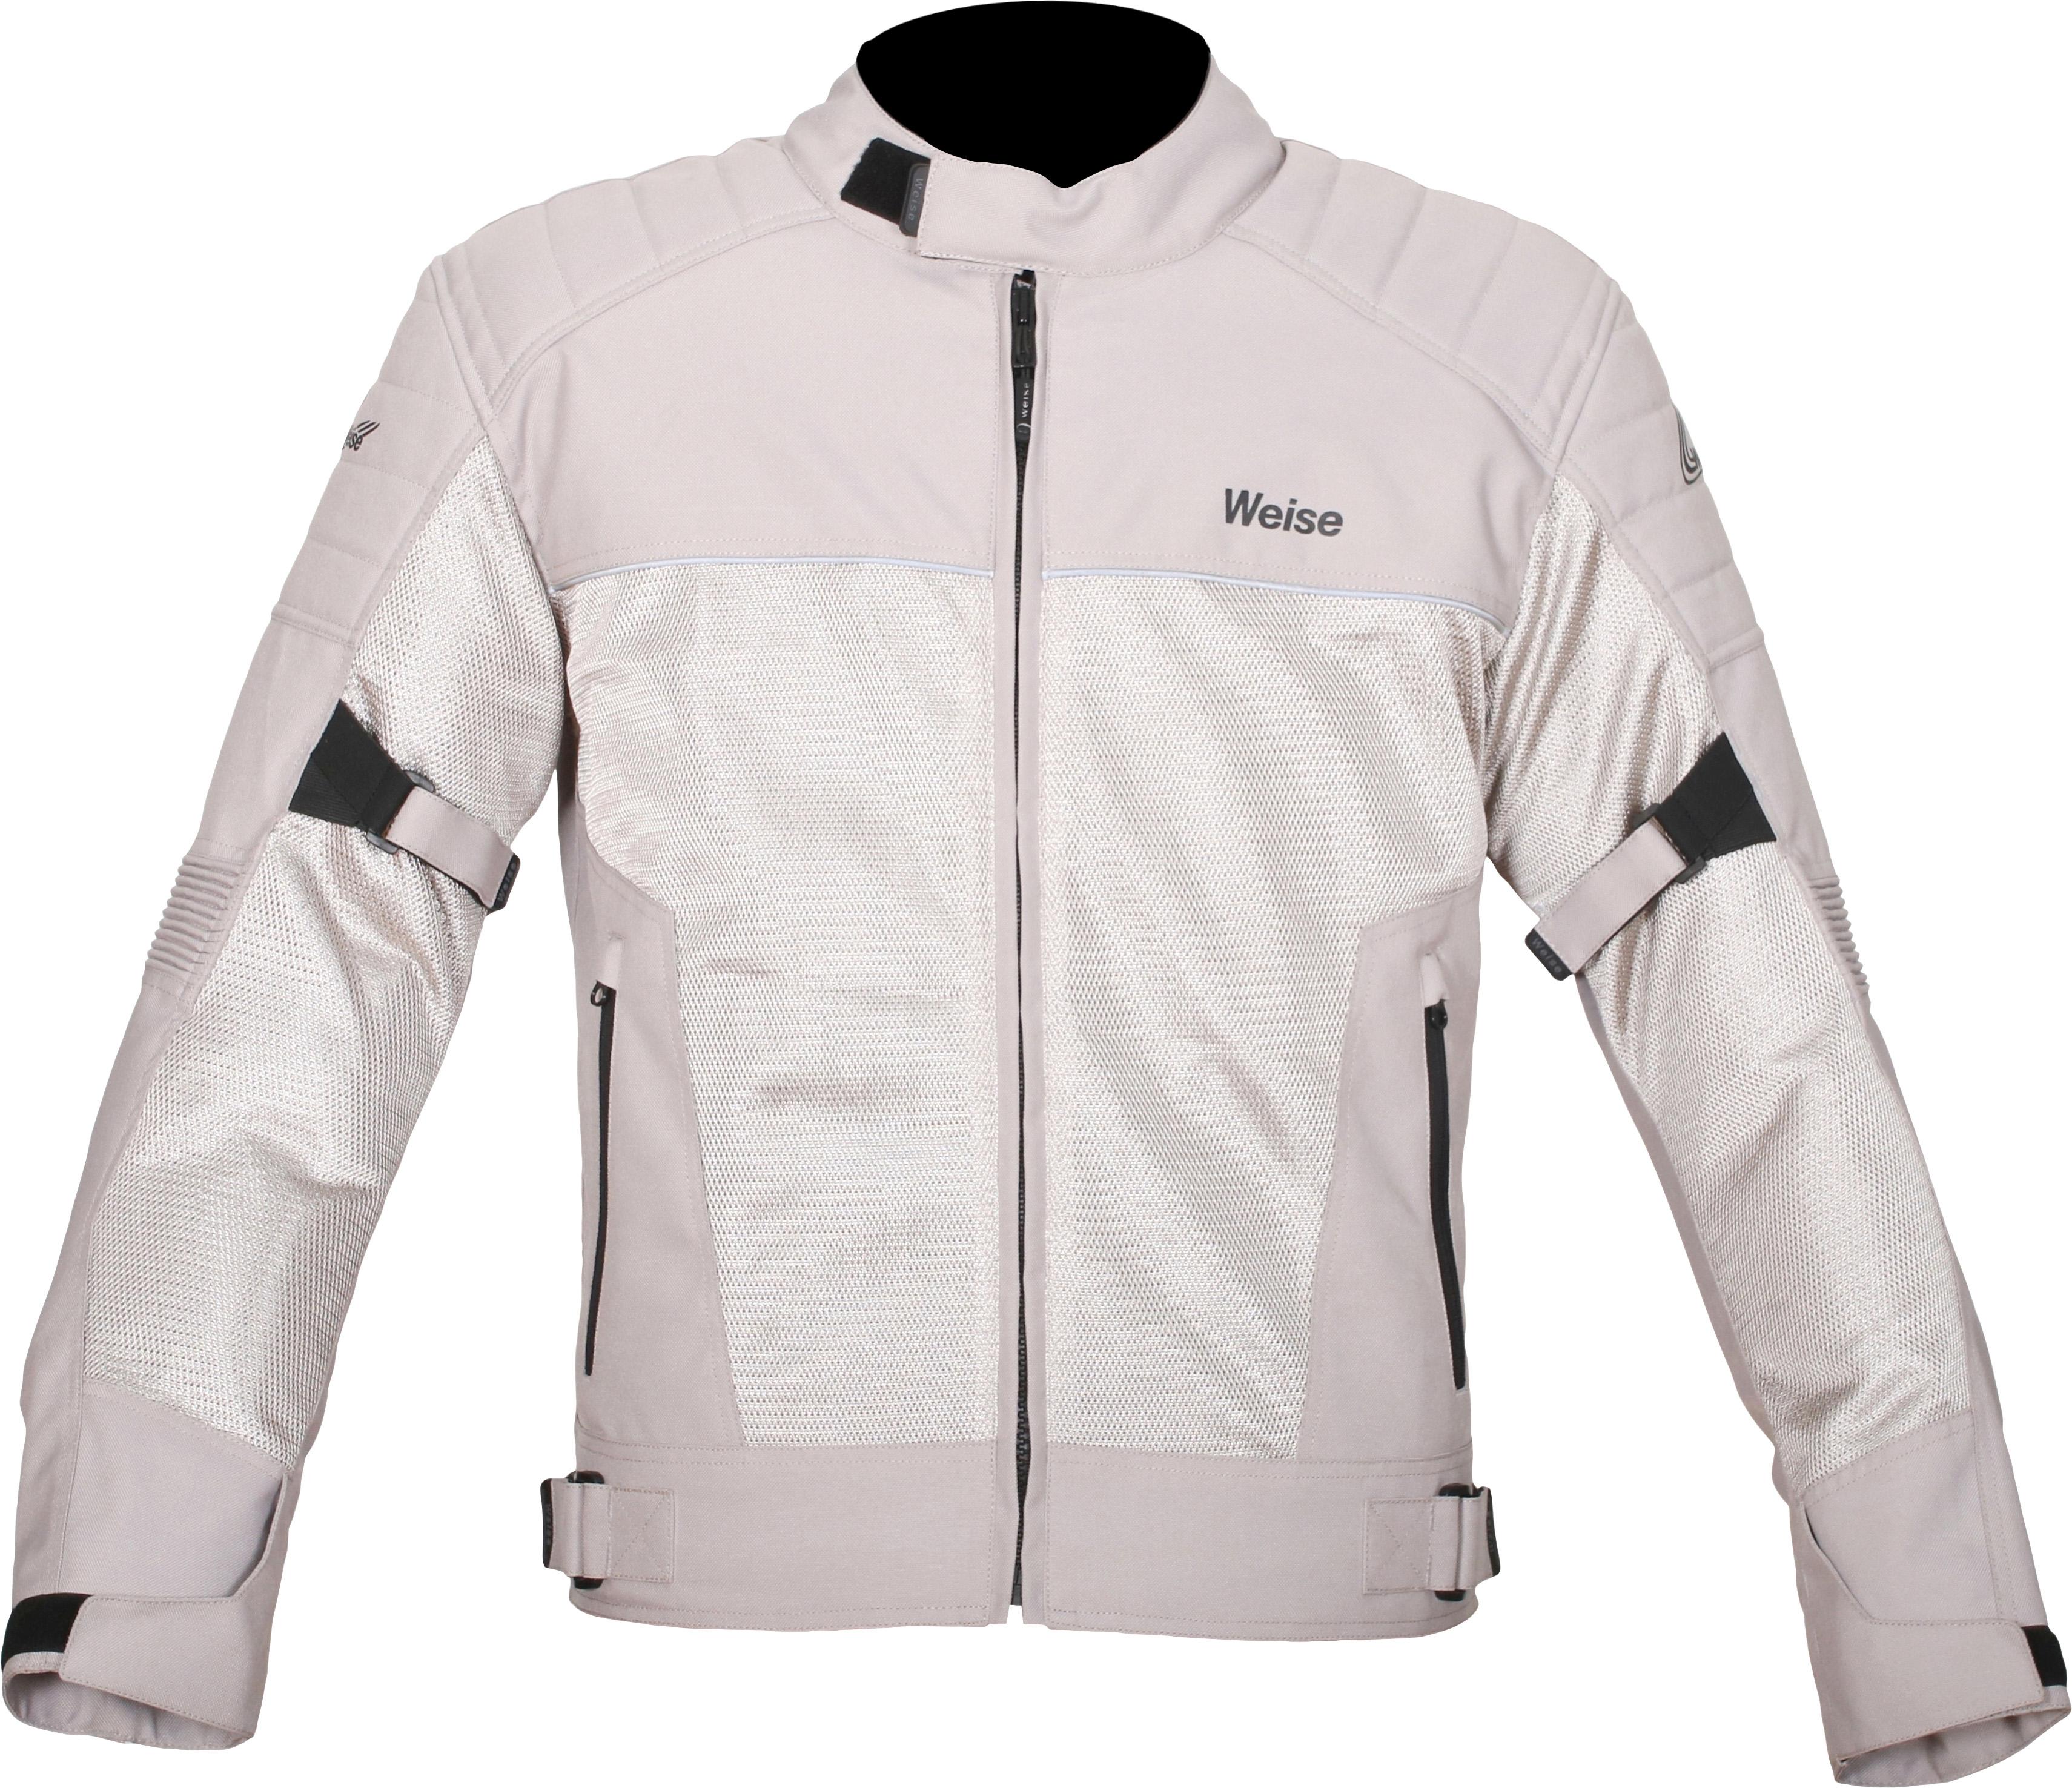 Weise Scout Motorcycle Jacket - Stone, 4Xl